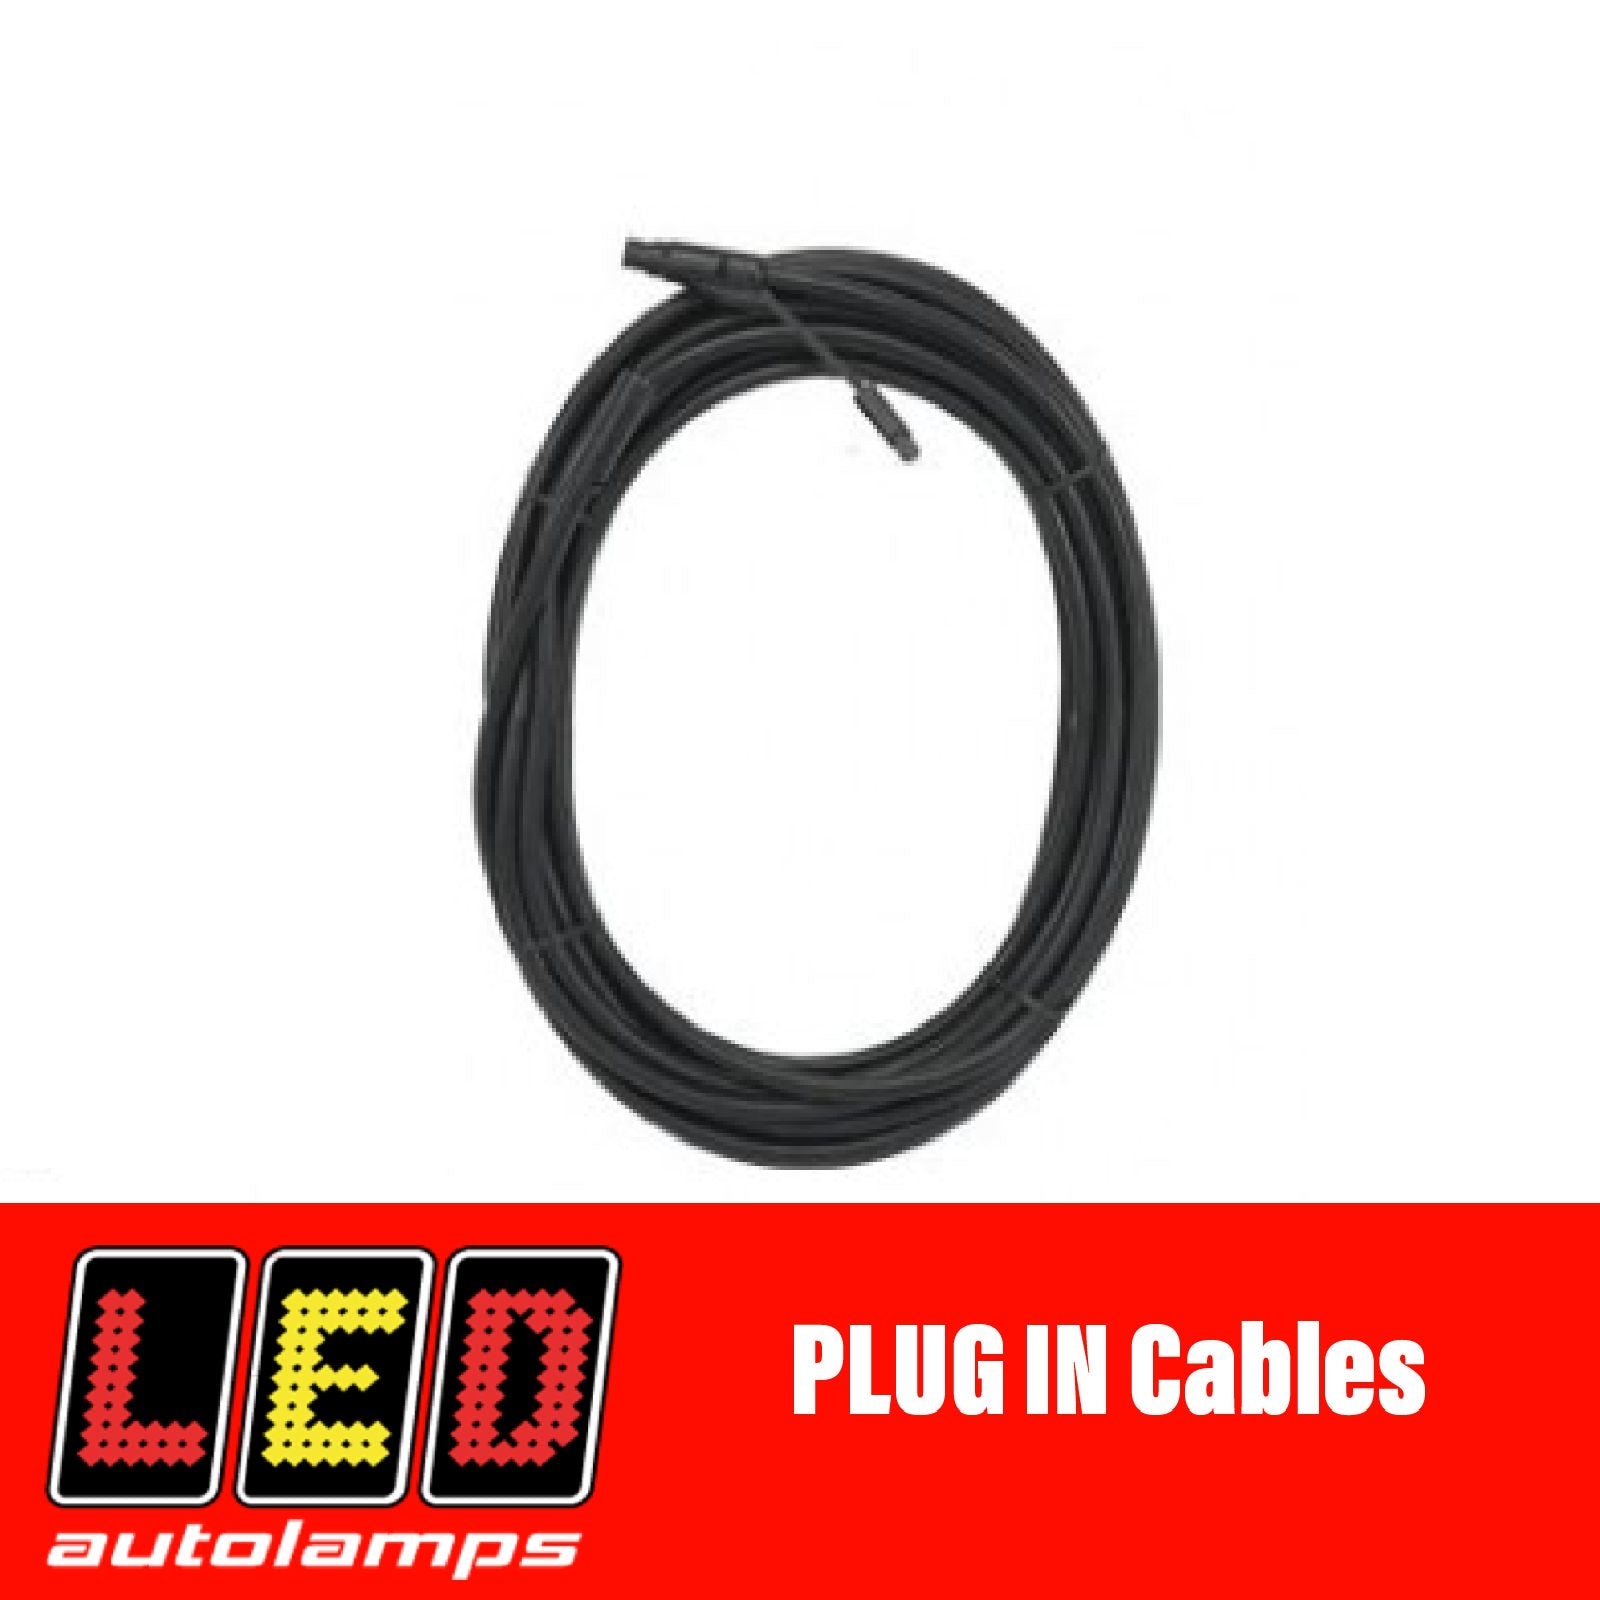 LED AUTOLAMPS 7 METRE PLUG WIRING HARNESS